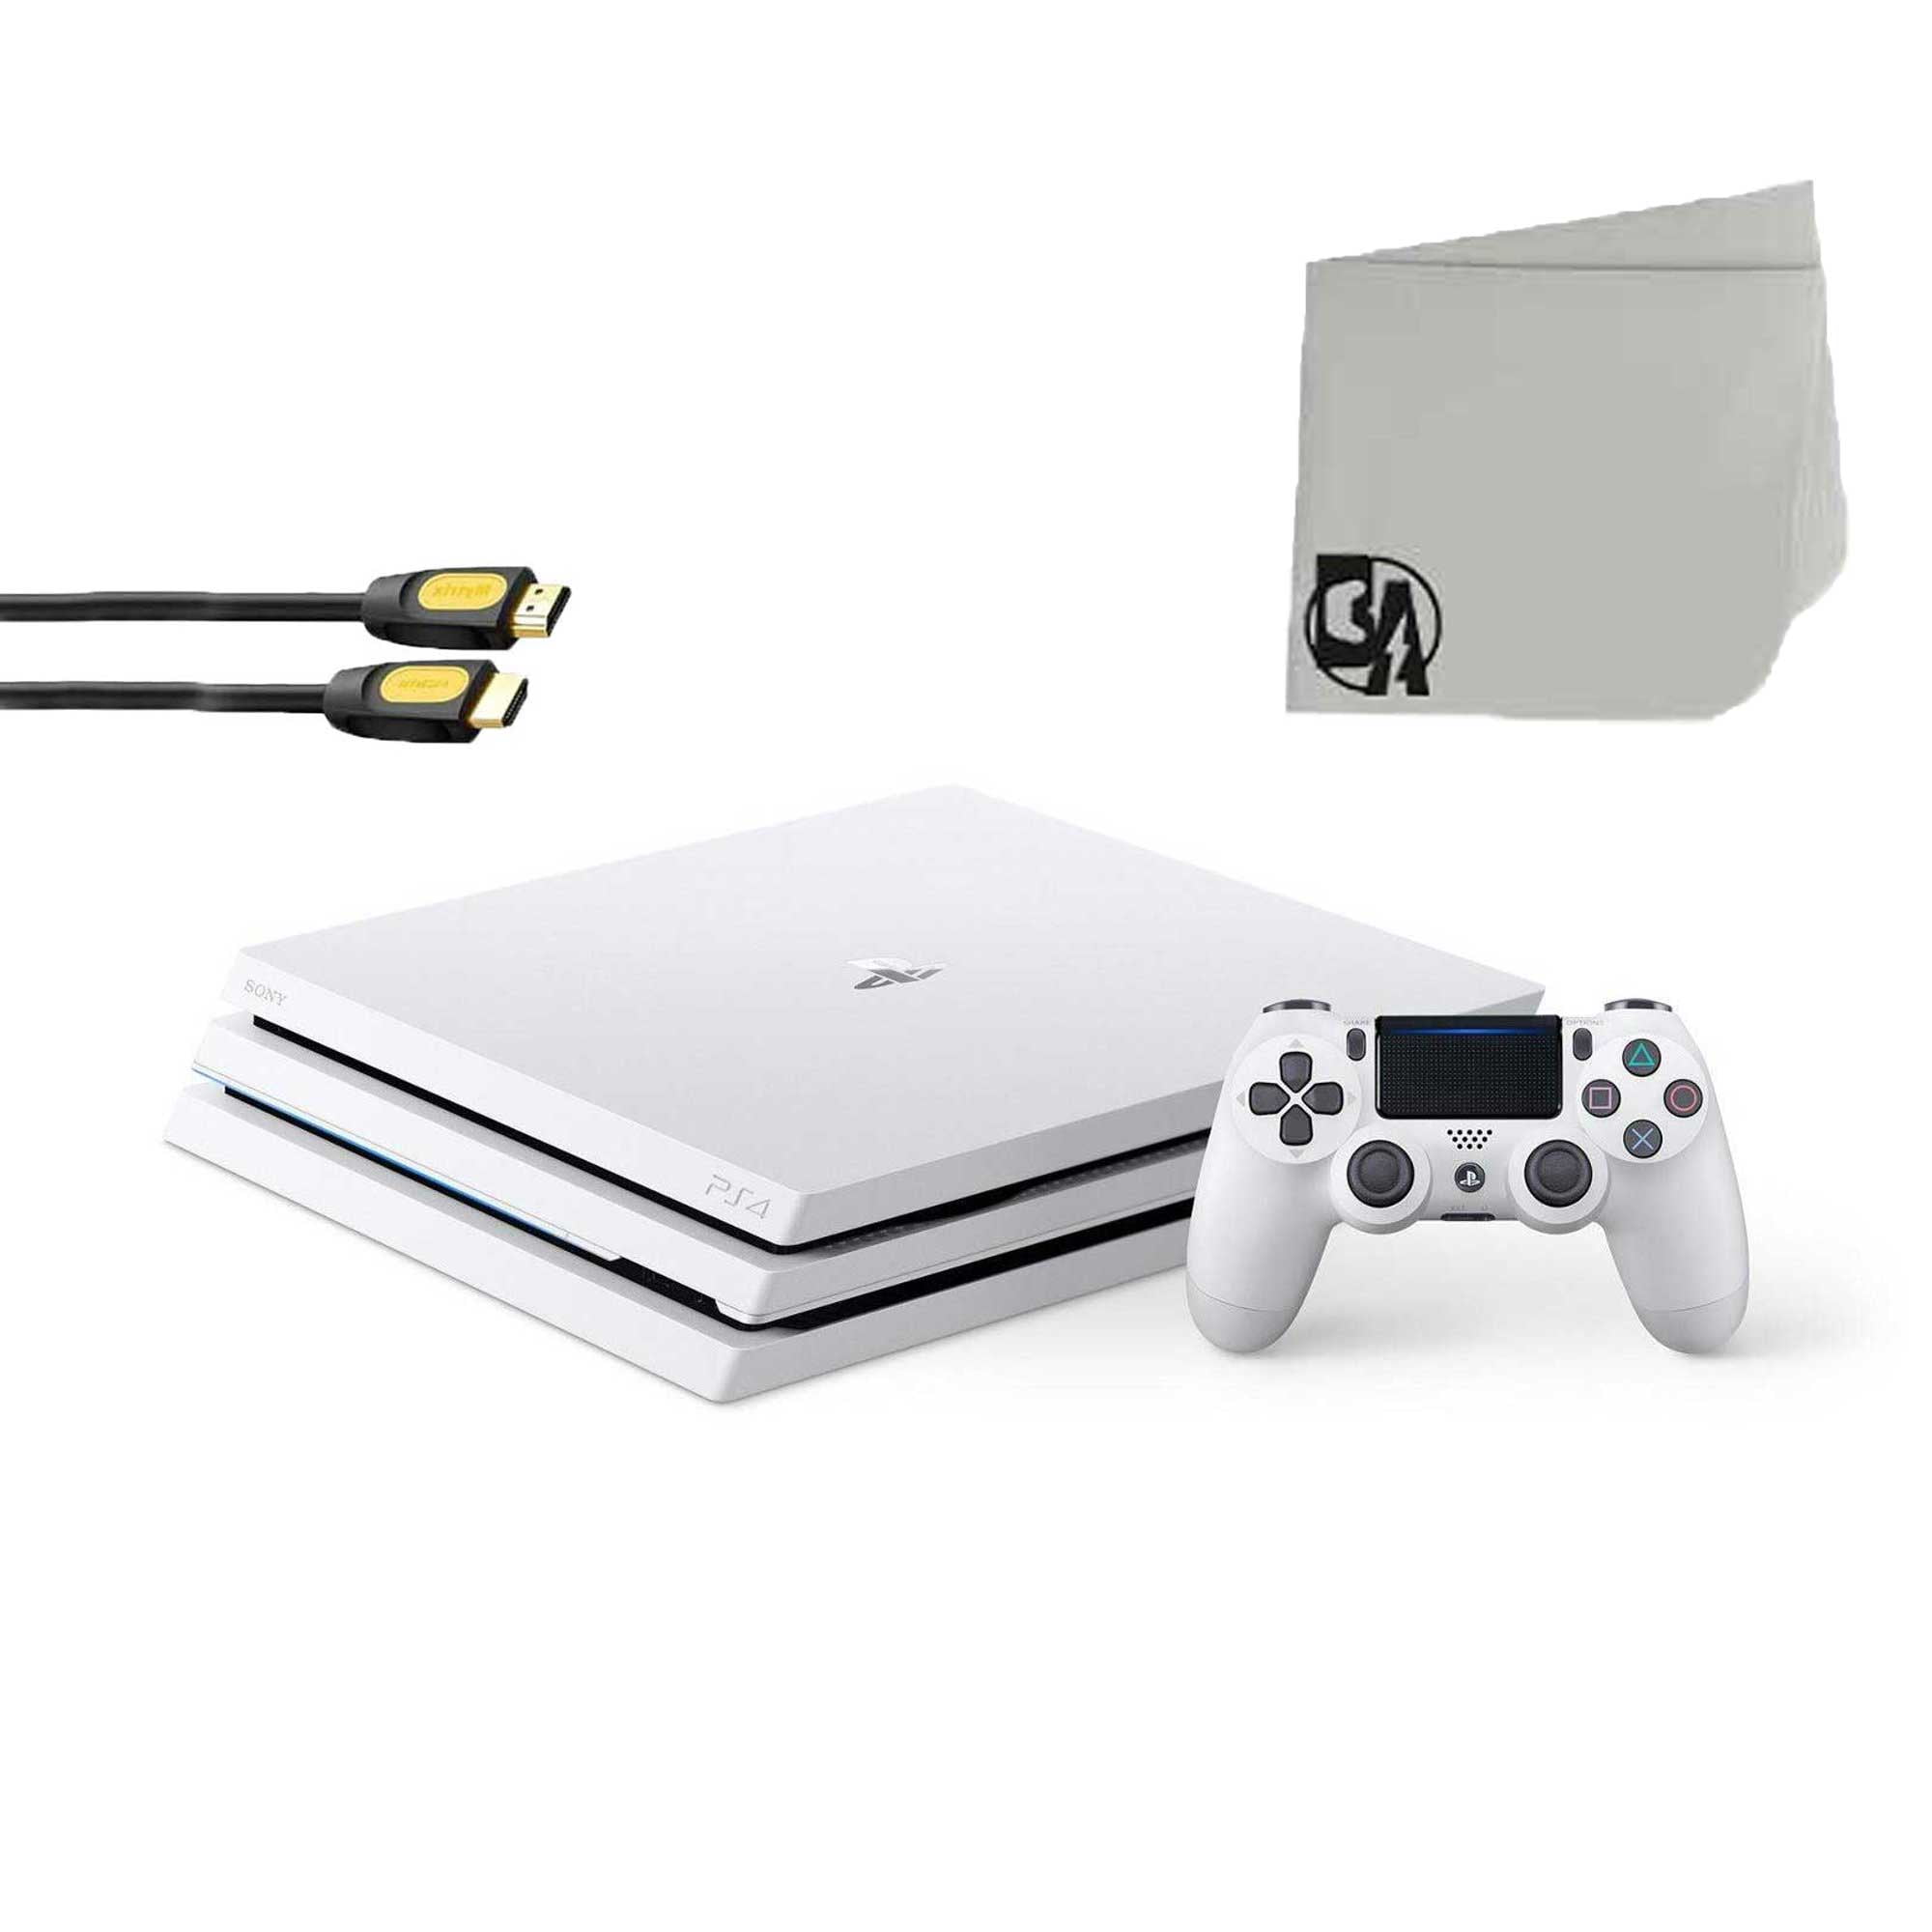 sydvest web fast Sony PlayStation 4 PRO Glacier 1TB Gaming Console White with FIFA-20 BOLT  AXTION Bundle Like New - Walmart.com